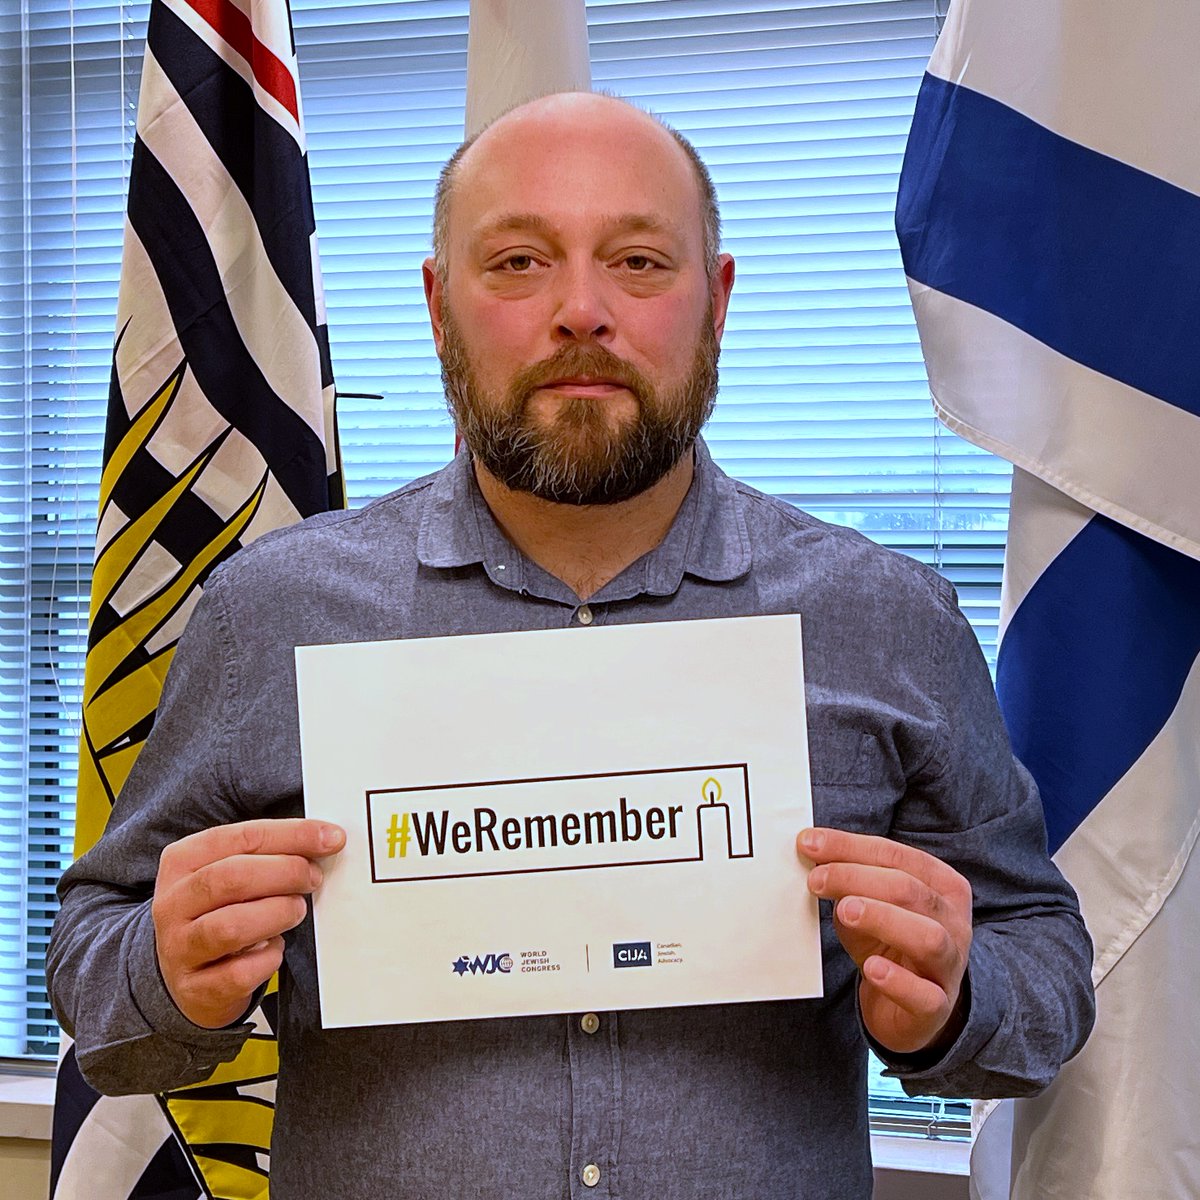 To honour the memory of the six million Jews & millions of others murdered by #NaziGermany, the United Nations designated January 27 International Holocaust Remembrance Day. Join me in showing the world that #WeRemember the horrors of the #Holocaust, its Victims, and Survivors.